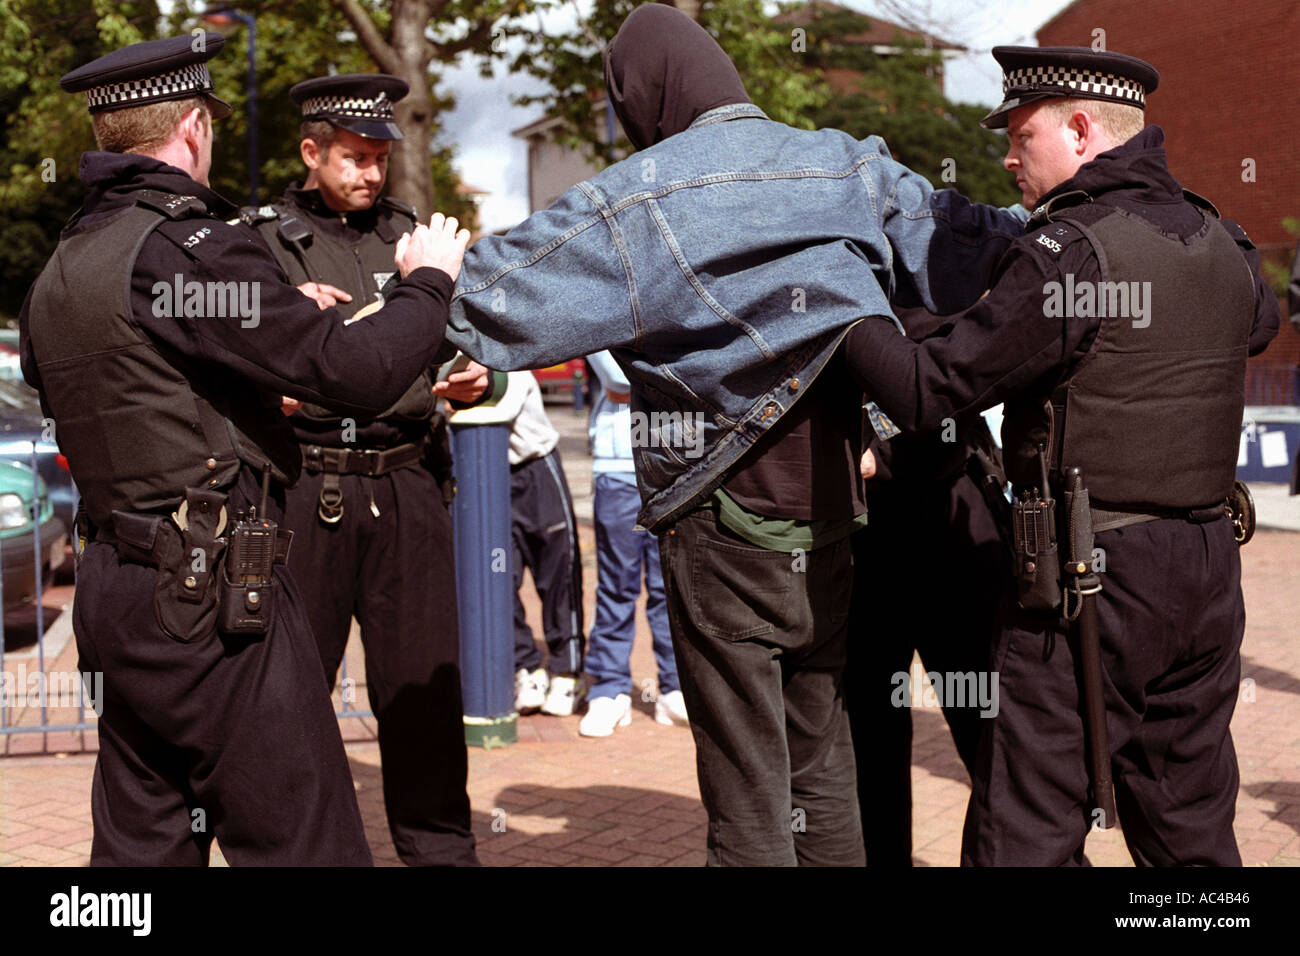 Young demonstrator being searched by police under section 44 at an arms trade demonstration in London. Stock Photo